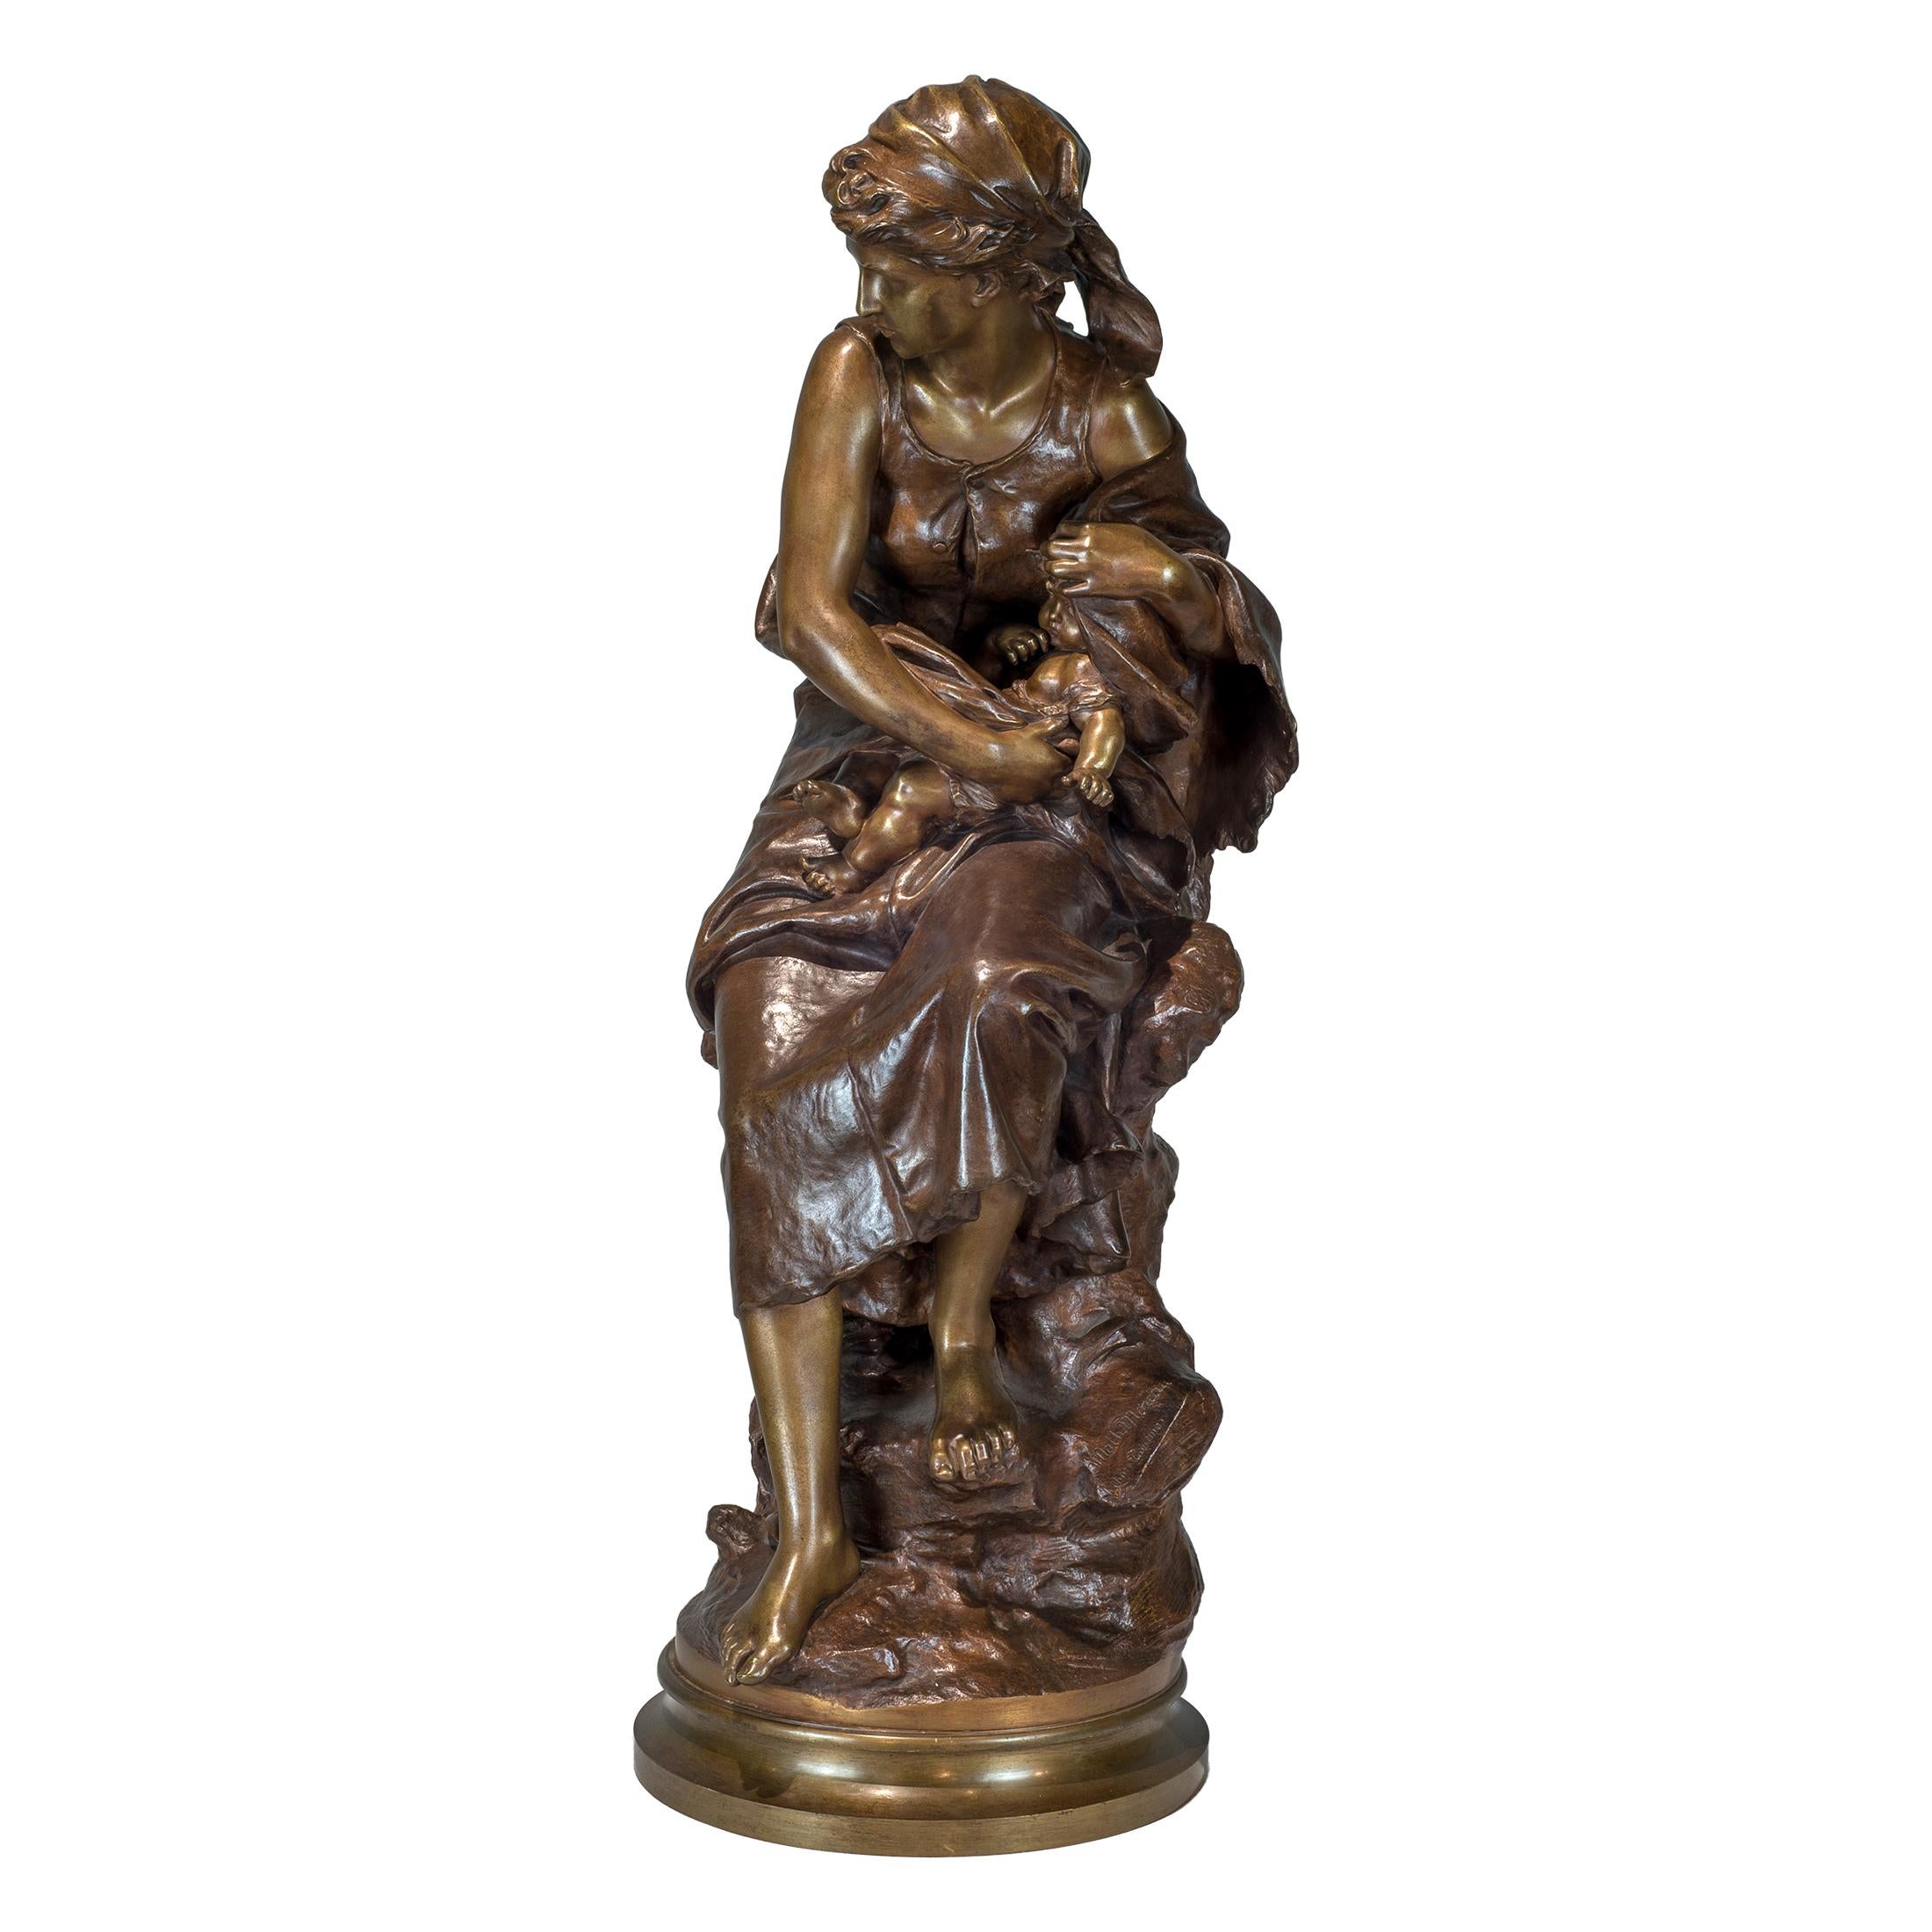 A fine quality patinated bronze group of a mother and child by Mathurin Moreau. Signed ‘Math.Moreau’. 

Maker: Mathurin Moreau (French, 1822-1912)
Date: 19th century 
Dimension: 36 in. x 14 1/2 in.